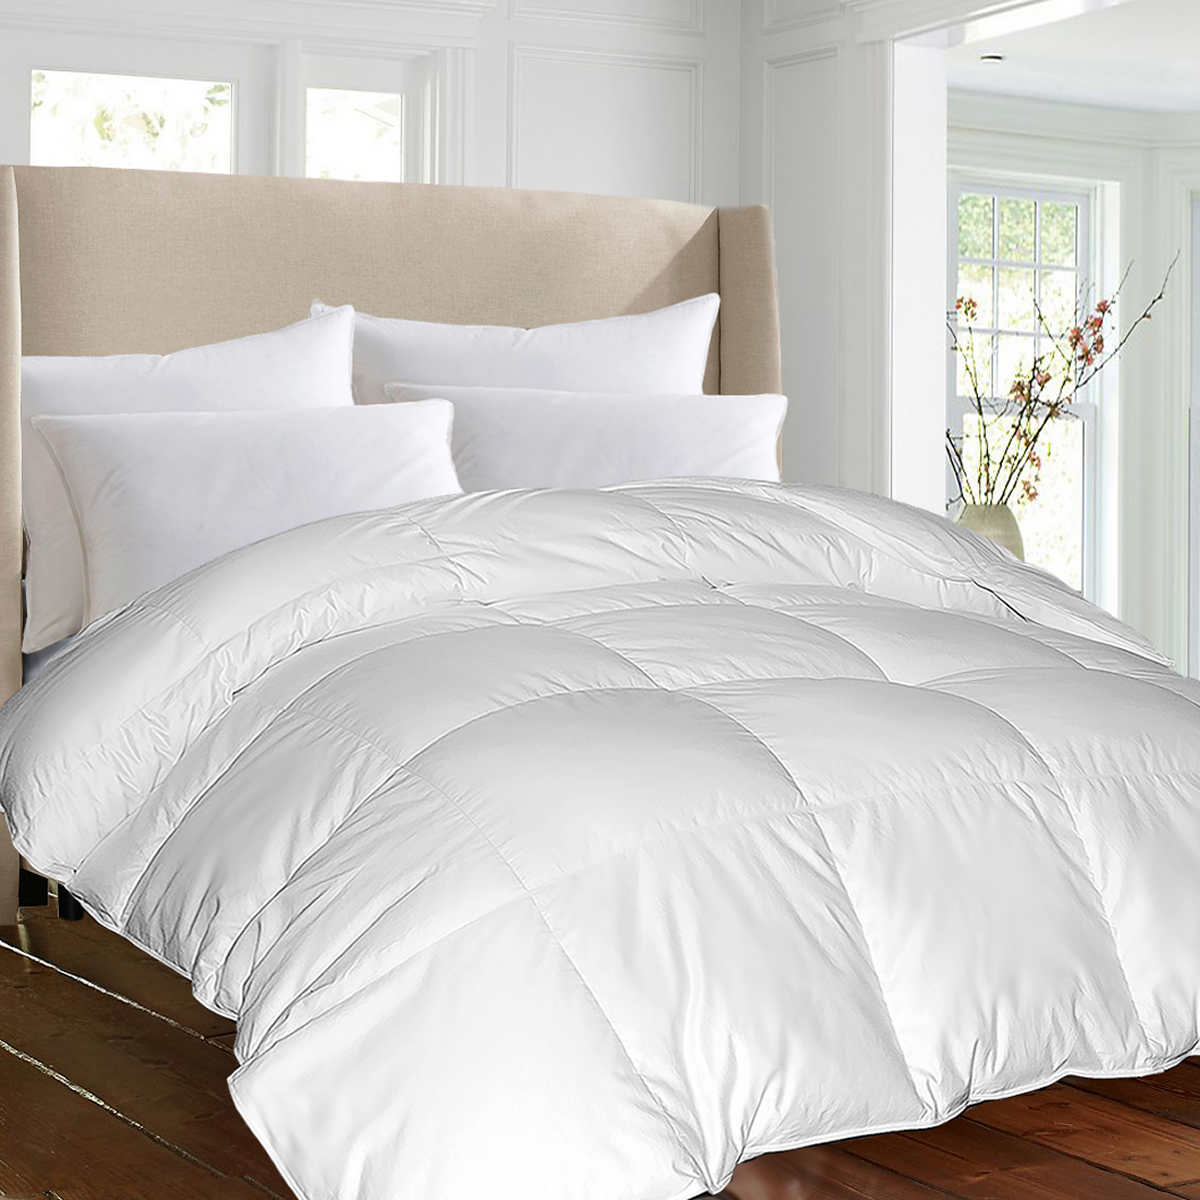 Double Queen Comforter White Duvet Comforter 1 Piece 1500 Thread Count Luxury Soft Breathable Hypoallergenic Double Fill Down Alternative Comforter Set All Season Wrinkle Free & Machine Washable Comforter by PerfectSense